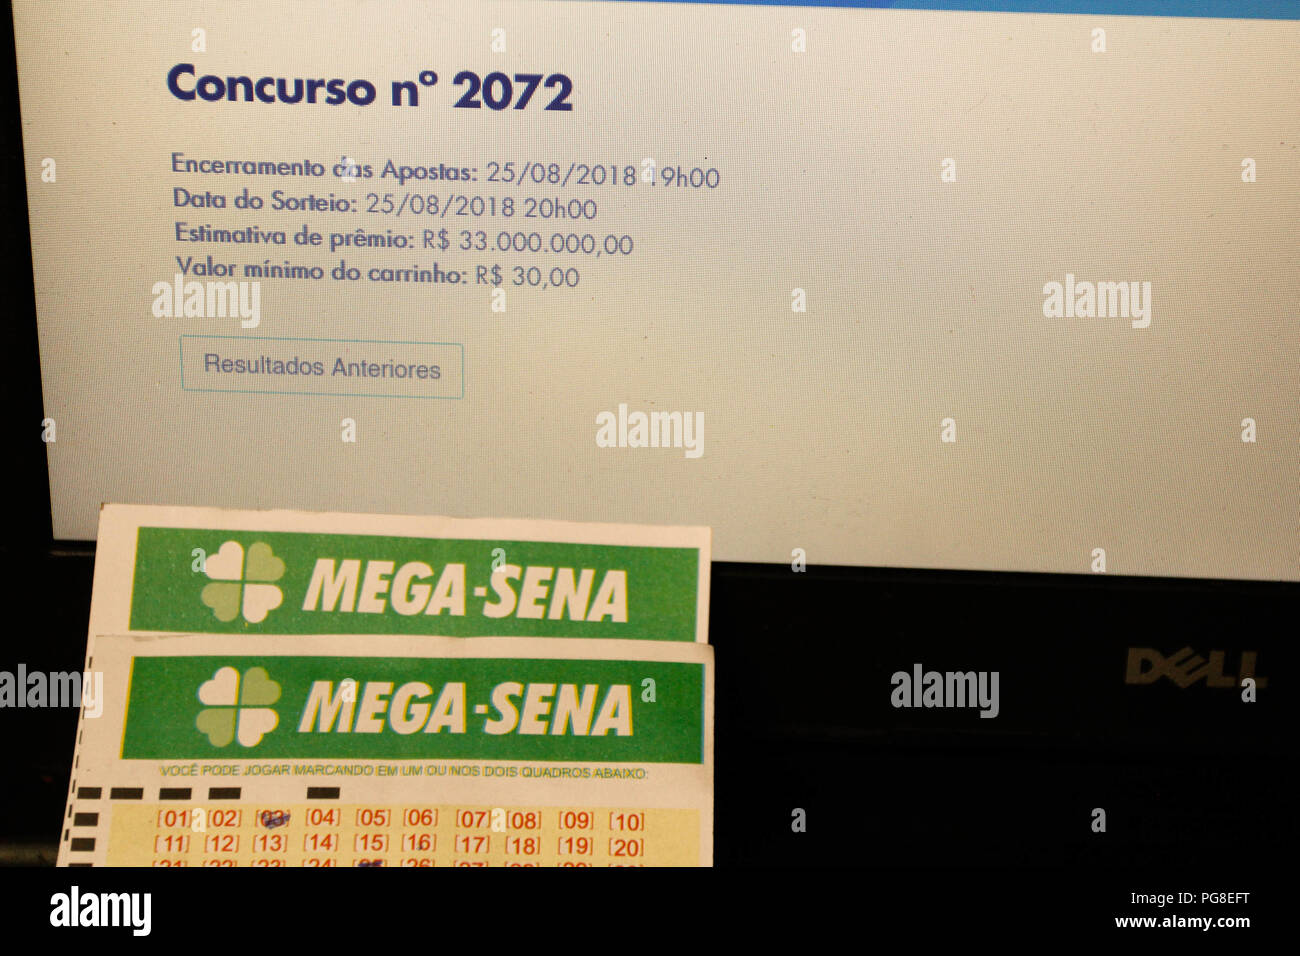 SÃO PAULO, SP - 24.08.2018: MEGA SENA PAGARÁ 33 MILHÕES - The draw of the 2072 contest of the mega-sena that will be held on Saturday (25), will pay the winner of the drawn lots, the amount of R $ 33 million. Bets may be placed up to one hour prior to the draw. (Photo: Aloisio Mauricio/Fotoarena) Stock Photo